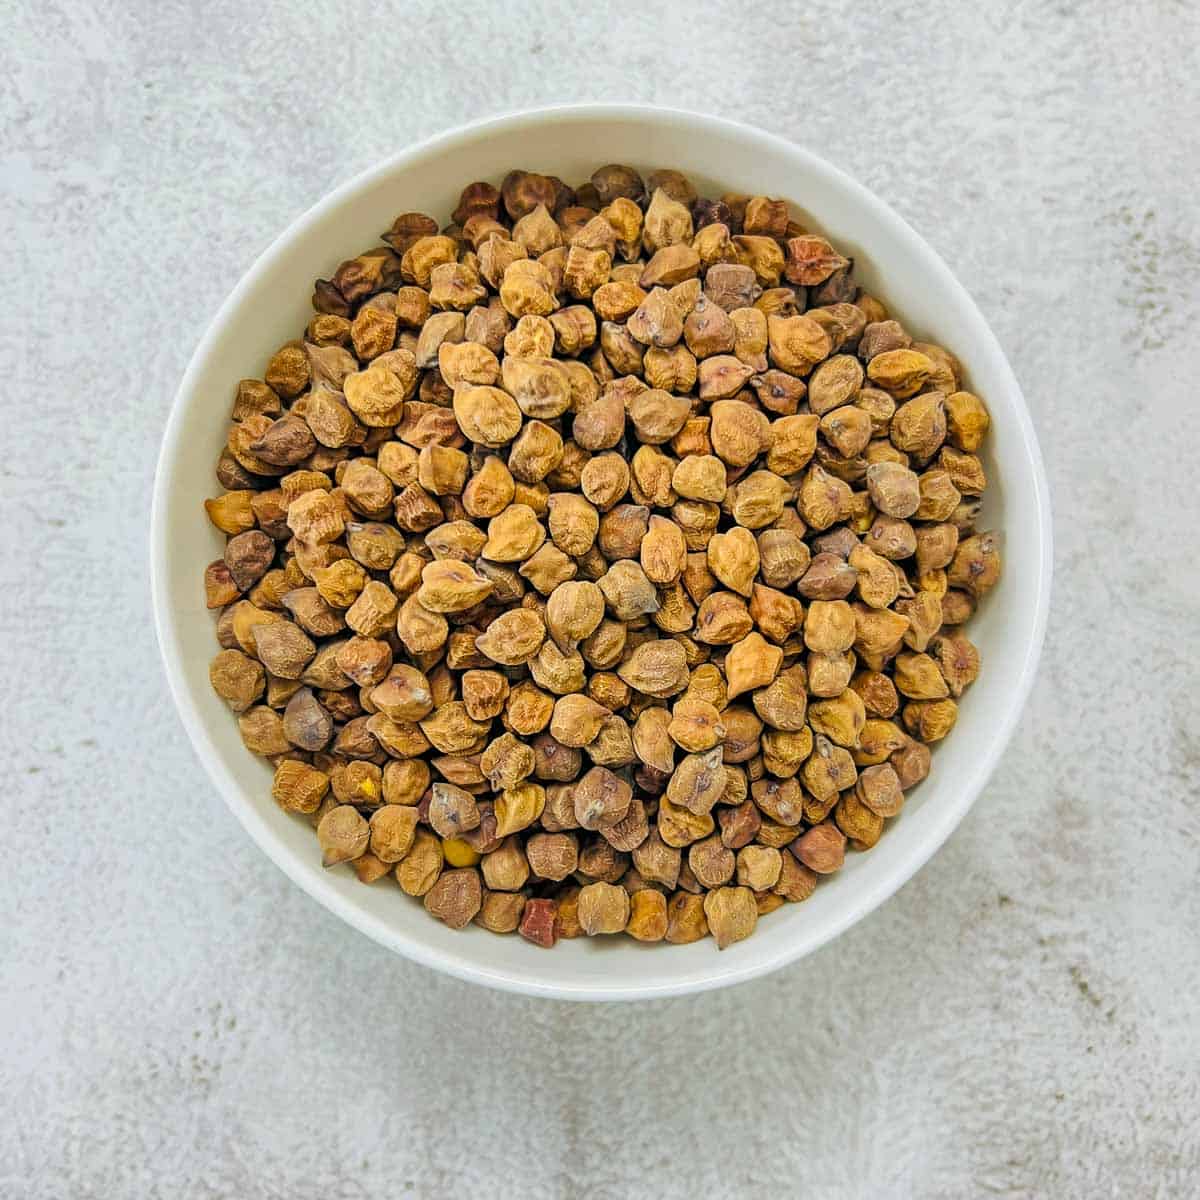 Dried black chickpeas in a white bowl.